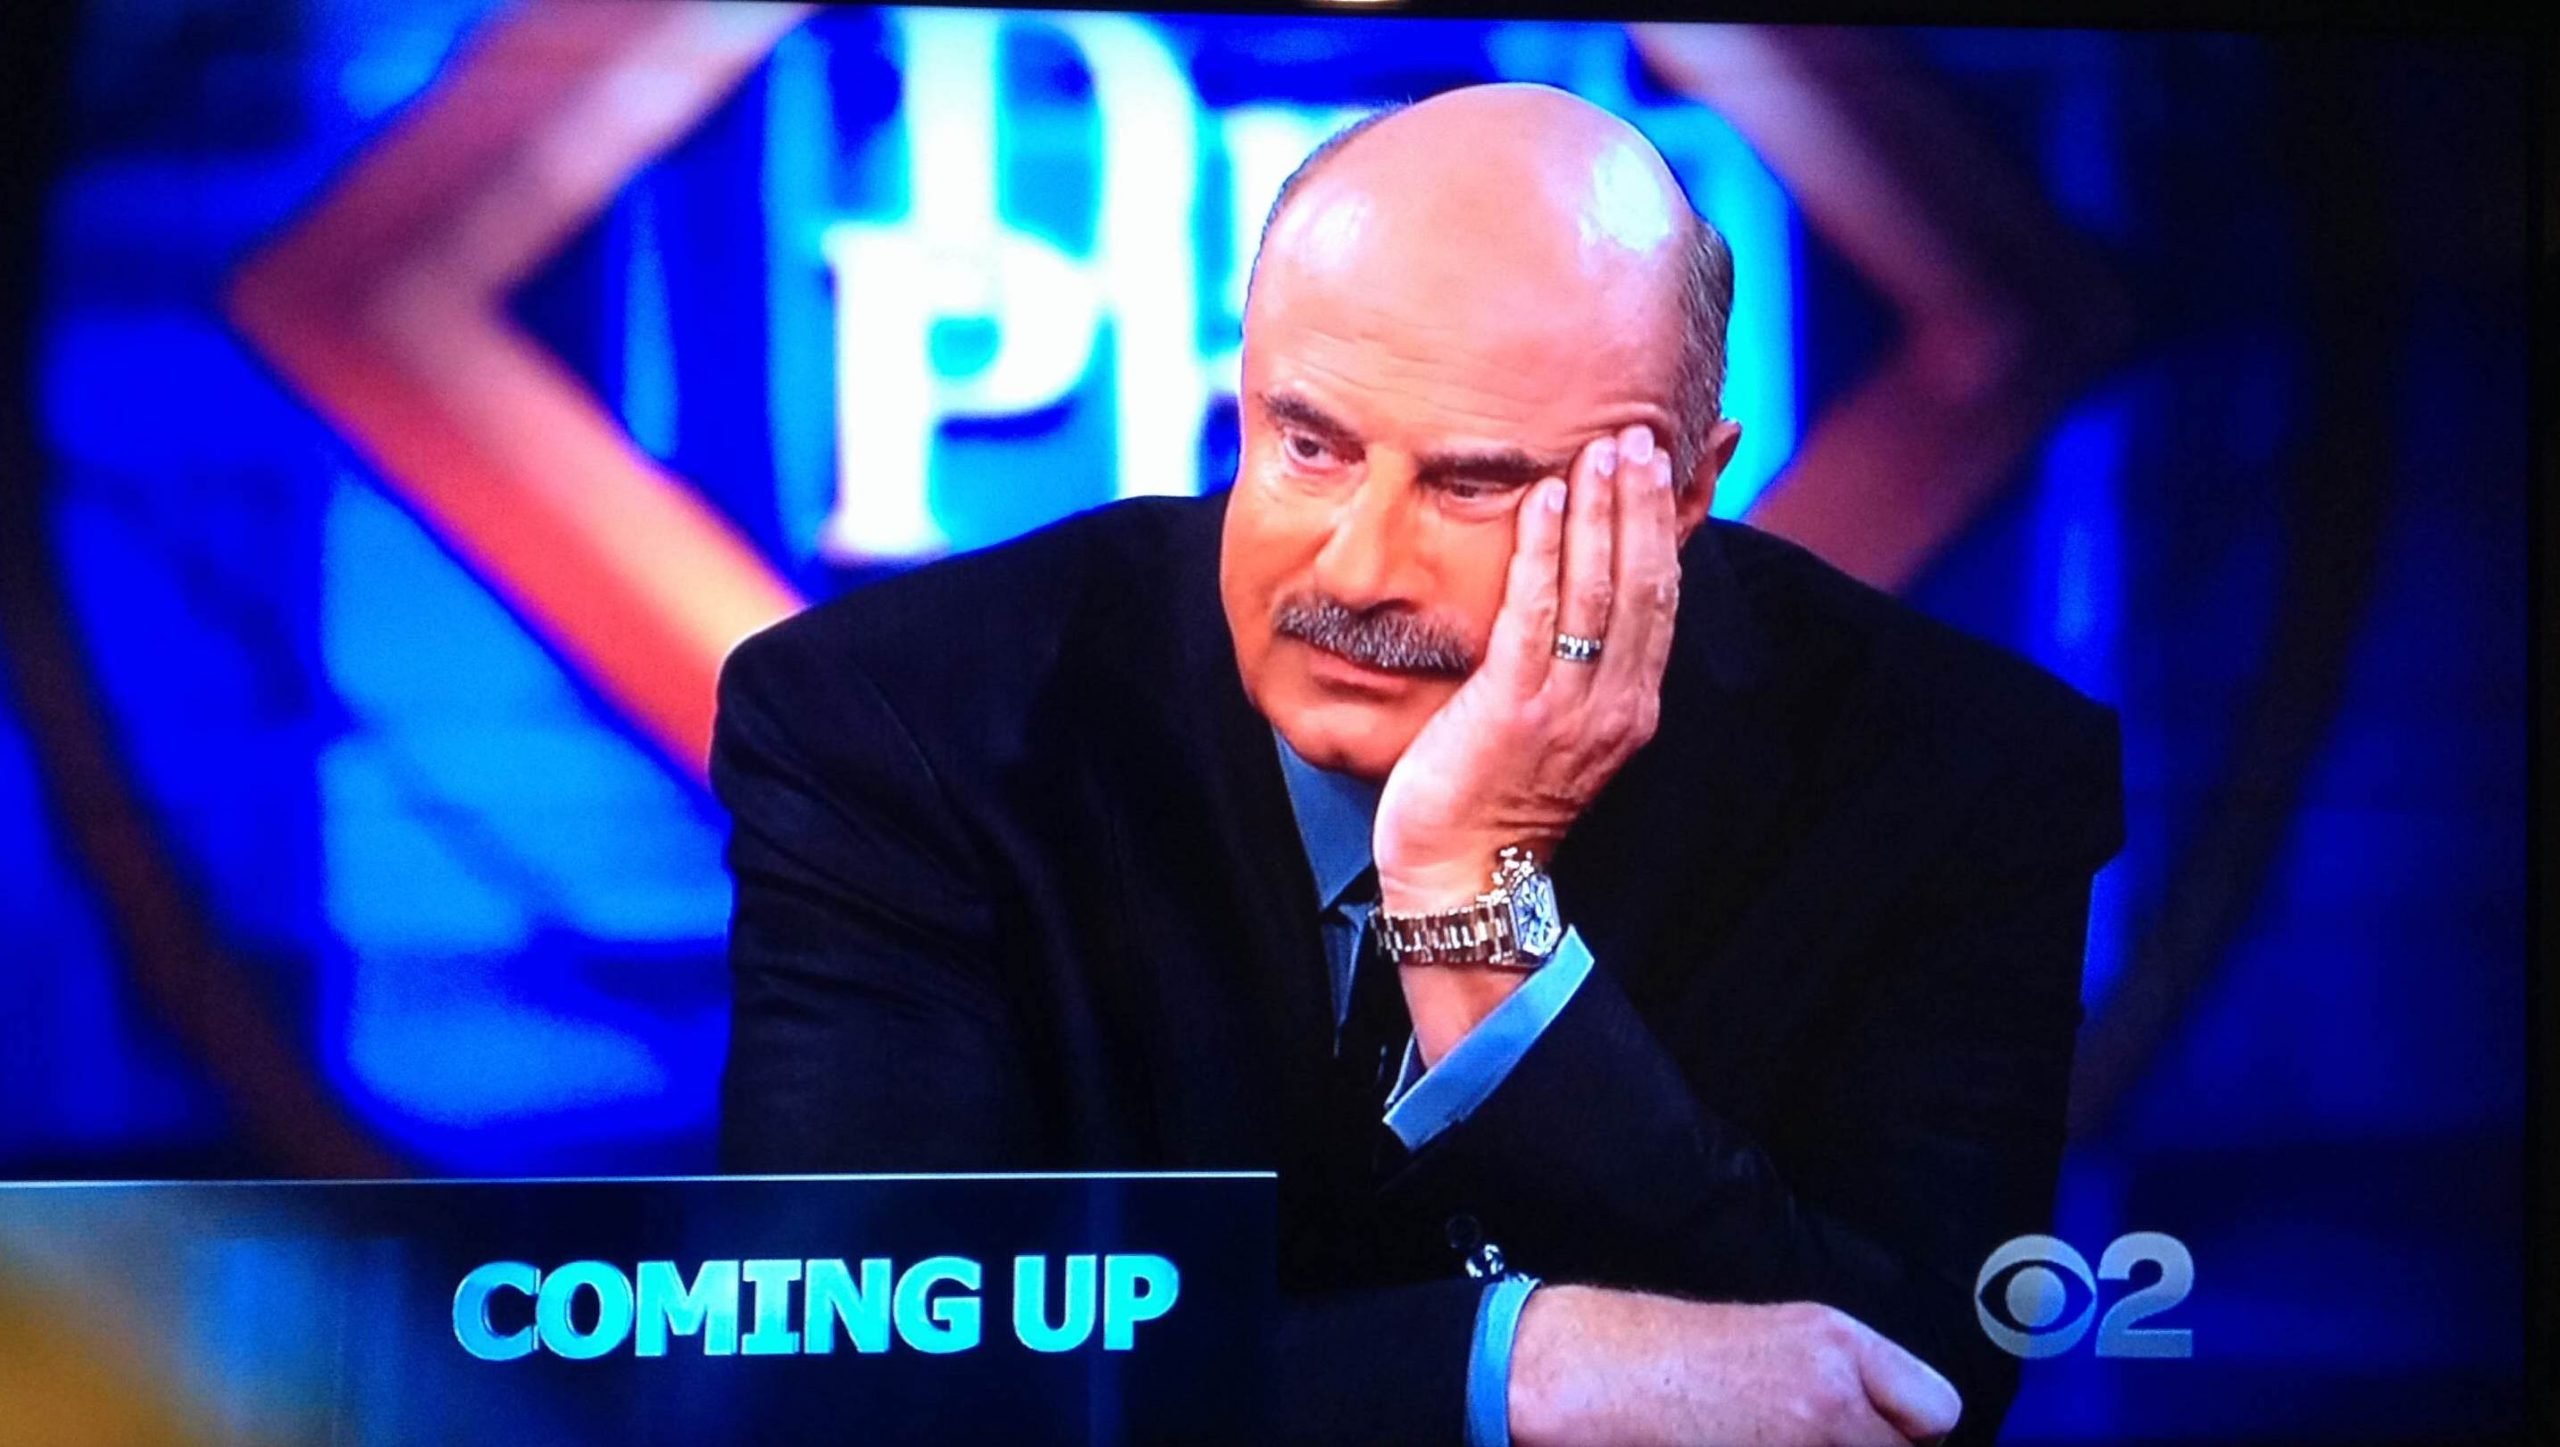 Whatâs Wrong with Dr. Phil